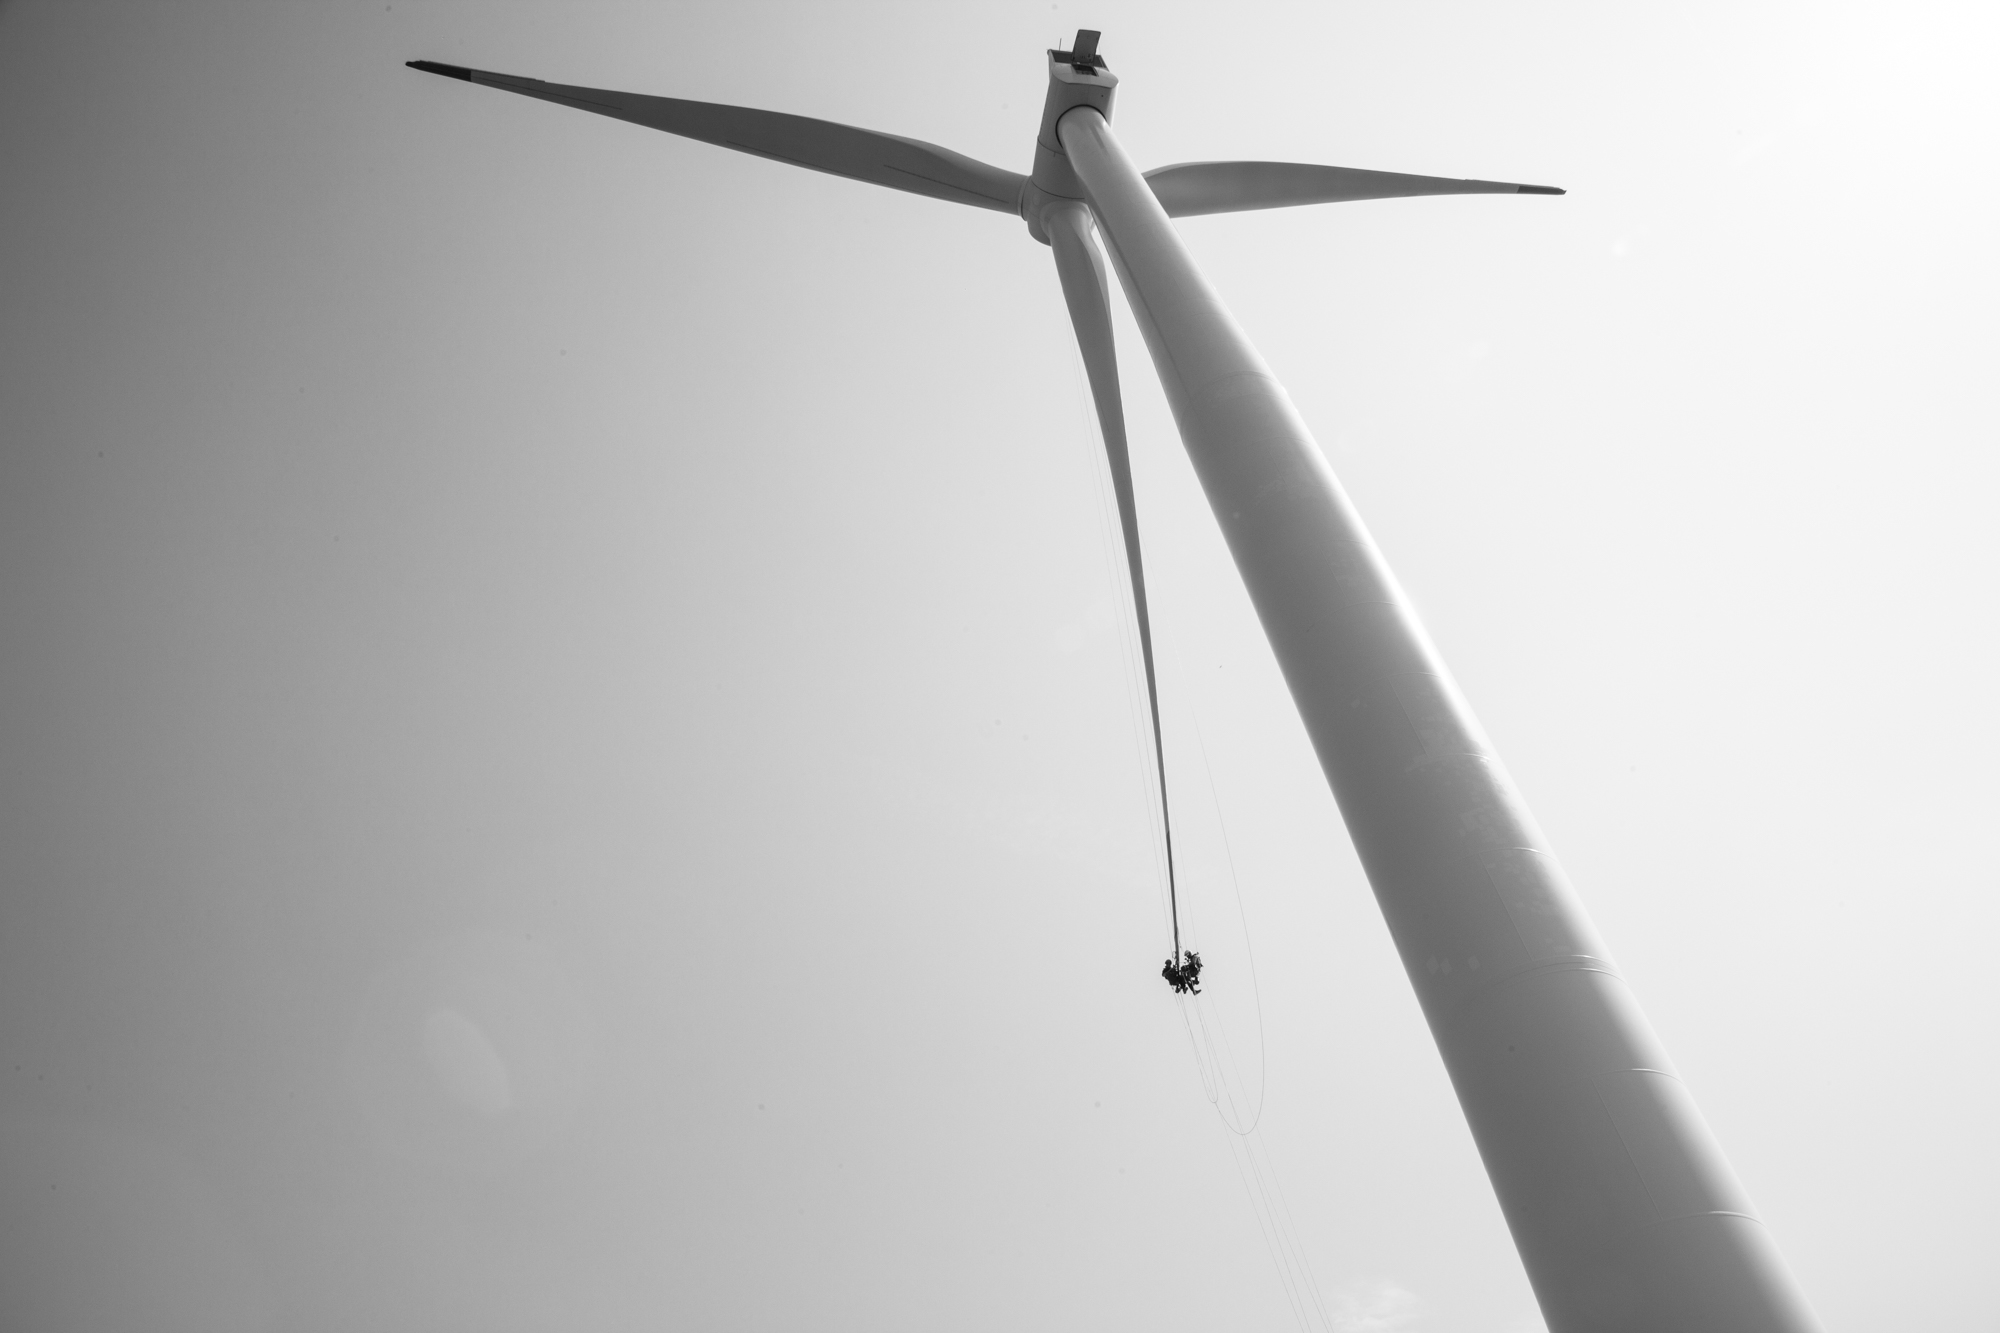 For external work, the tip is where technicians are most vulnerable. Hollow, and made of little more than balsa wood & fibre-glass, the turbine blades can flex significantly. On a windy day, it’s not uncommon to experience symptoms of motion sickness.